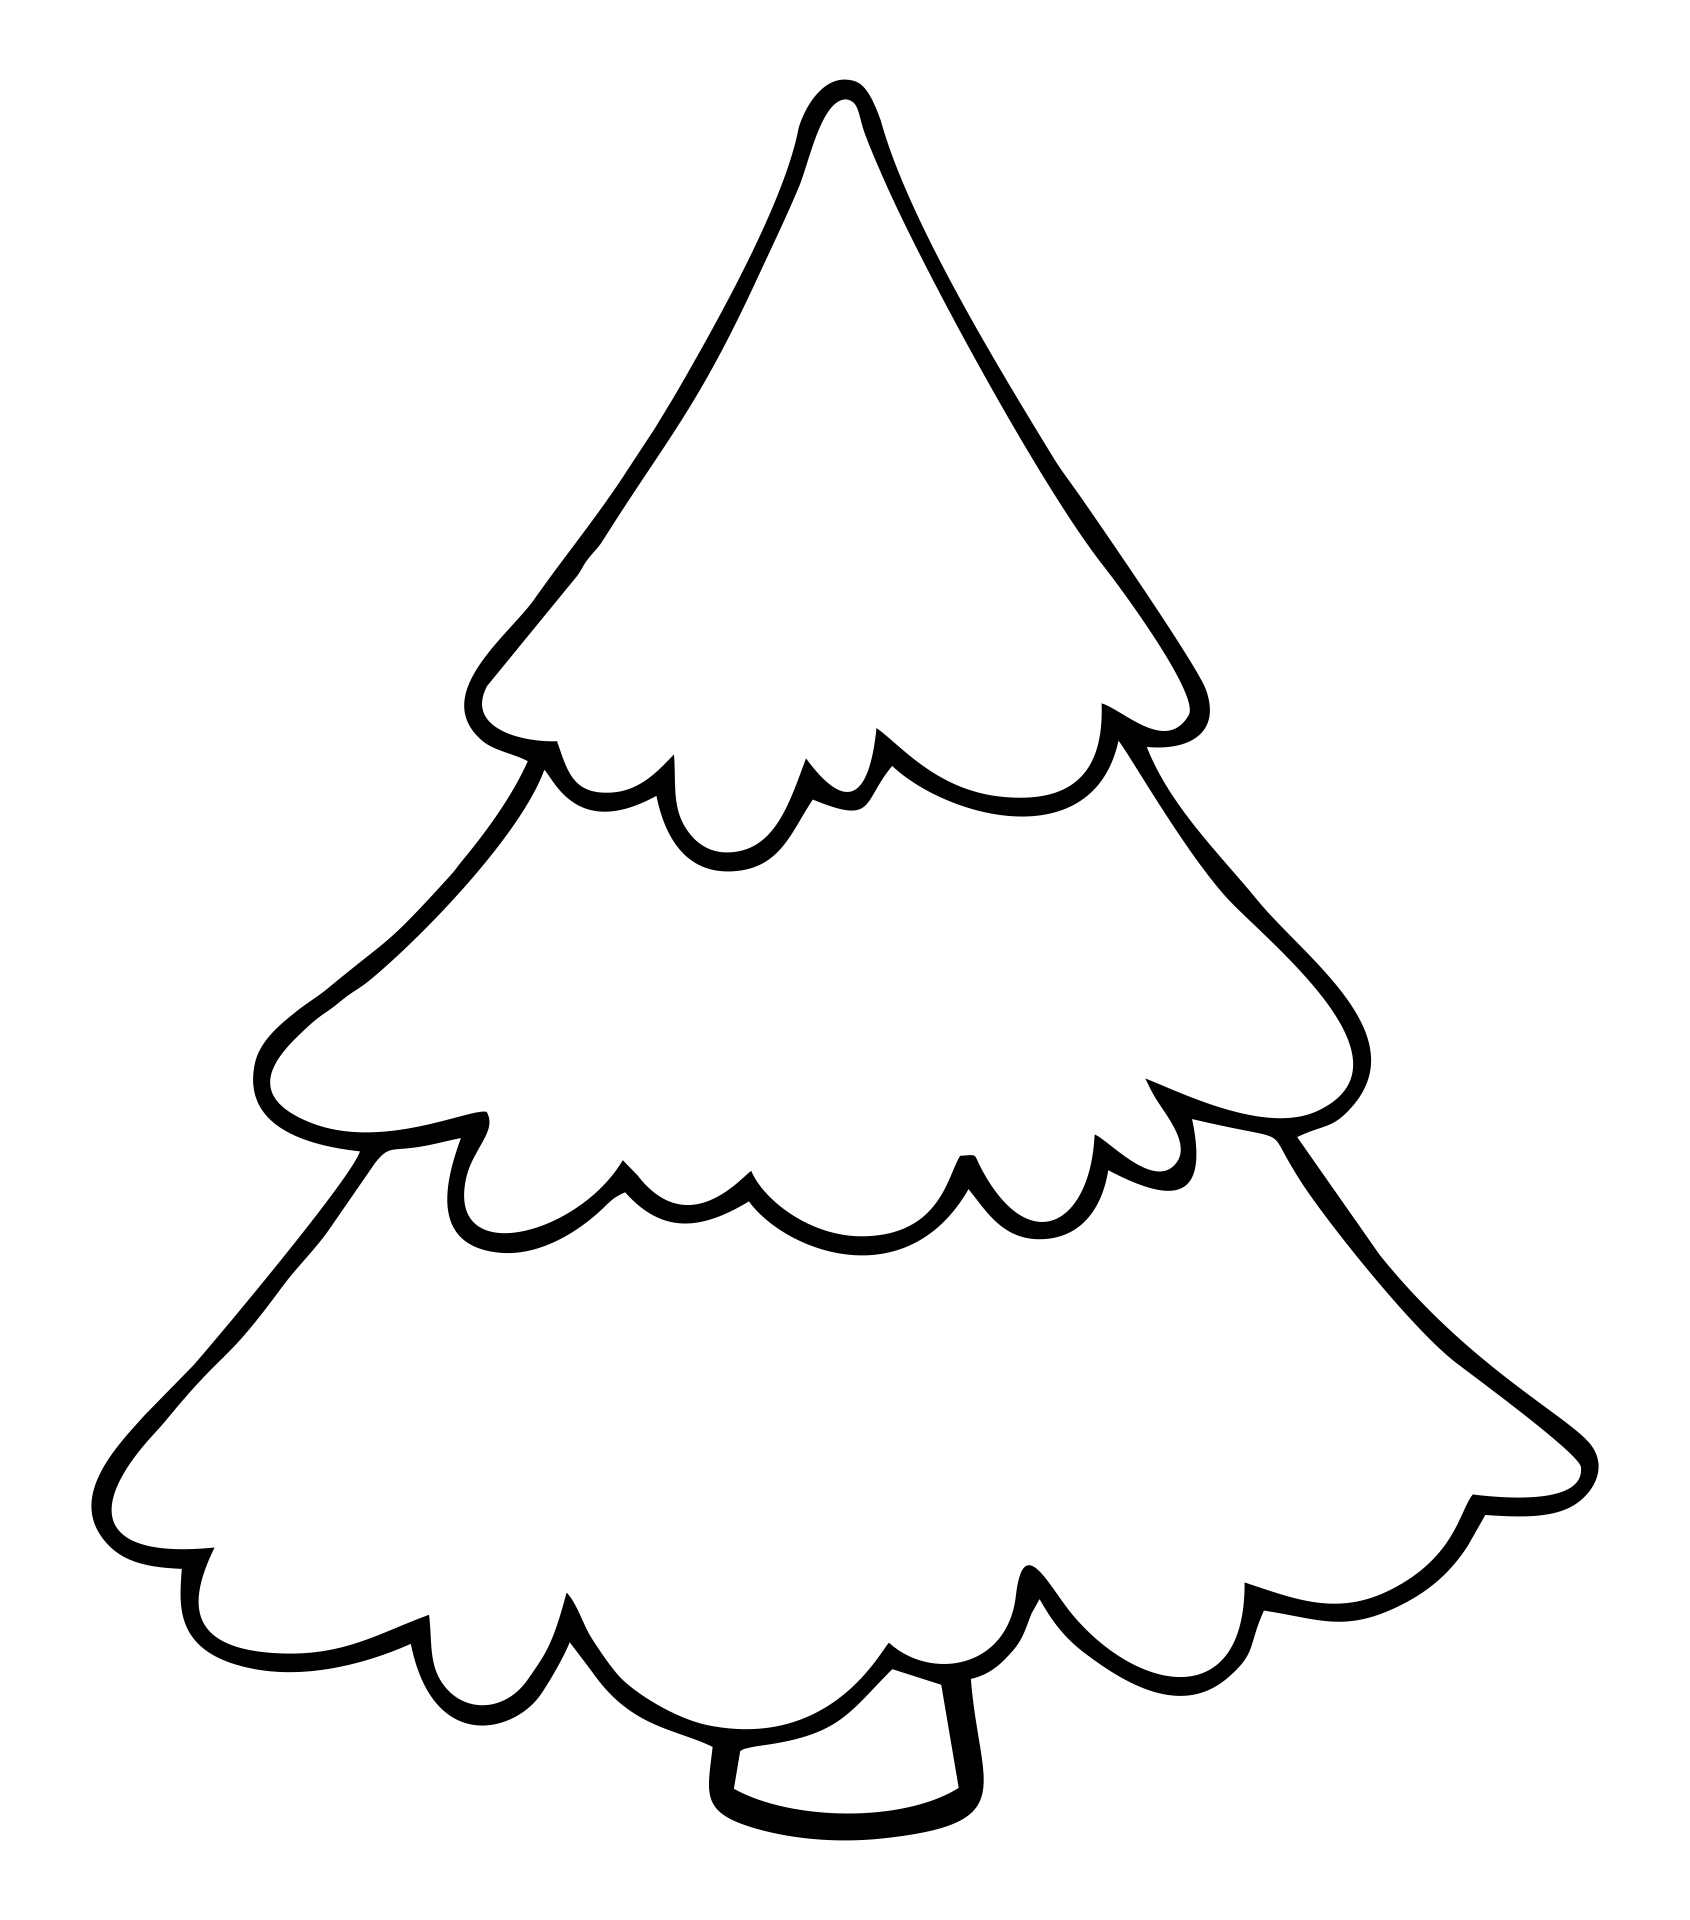 free-printable-images-of-christmas-trees-deck-the-halls-and-prepare-to